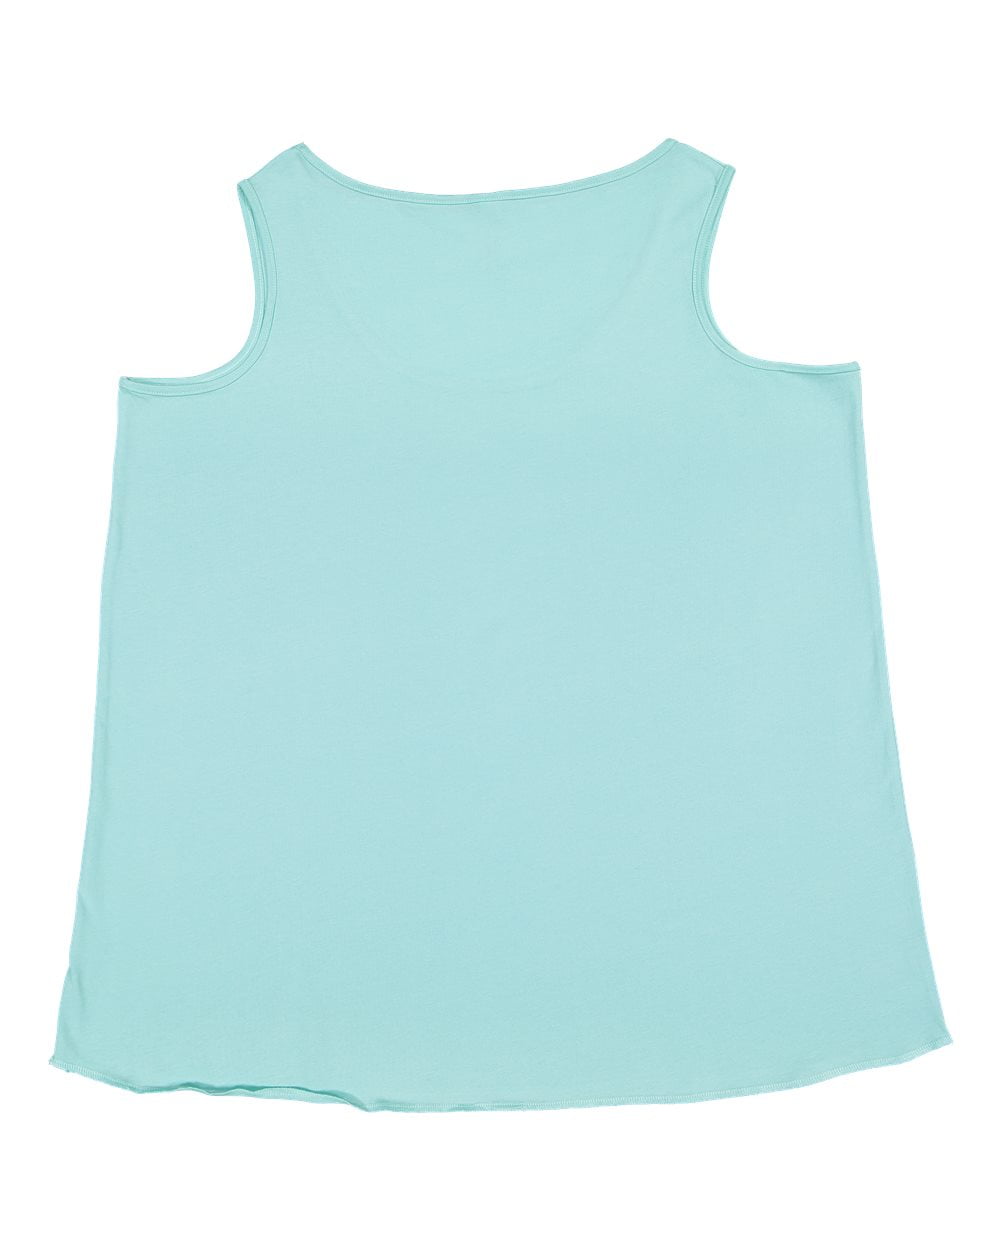 IWPF - Size Tank Top, up to Size 28 - Canada Leaf - Walmart.com